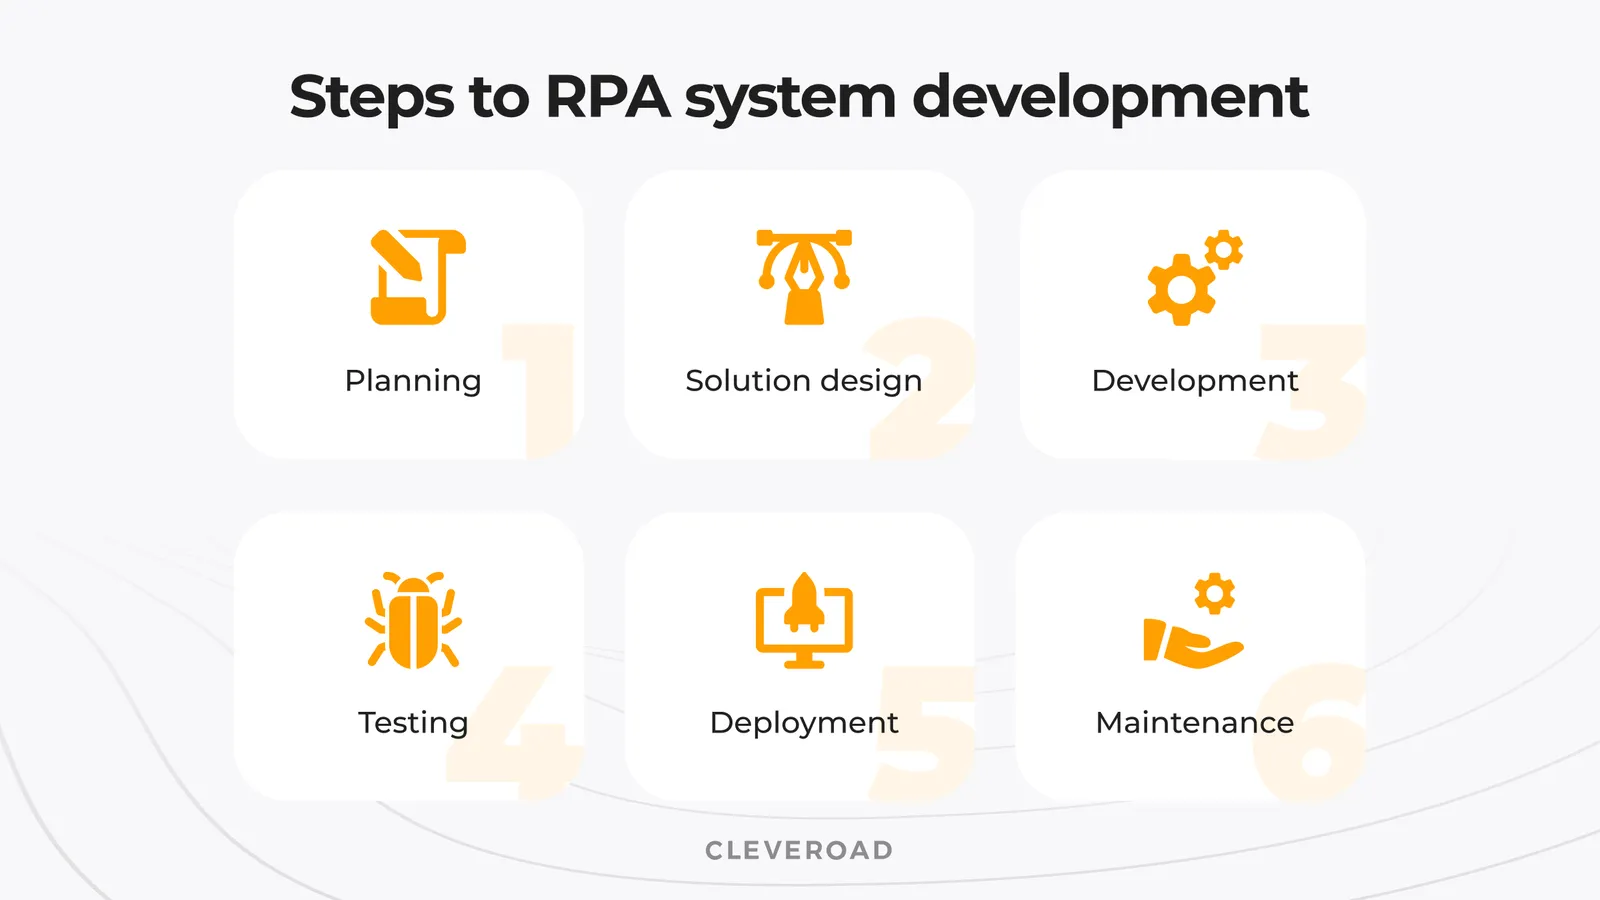 Steps to develop RPA system